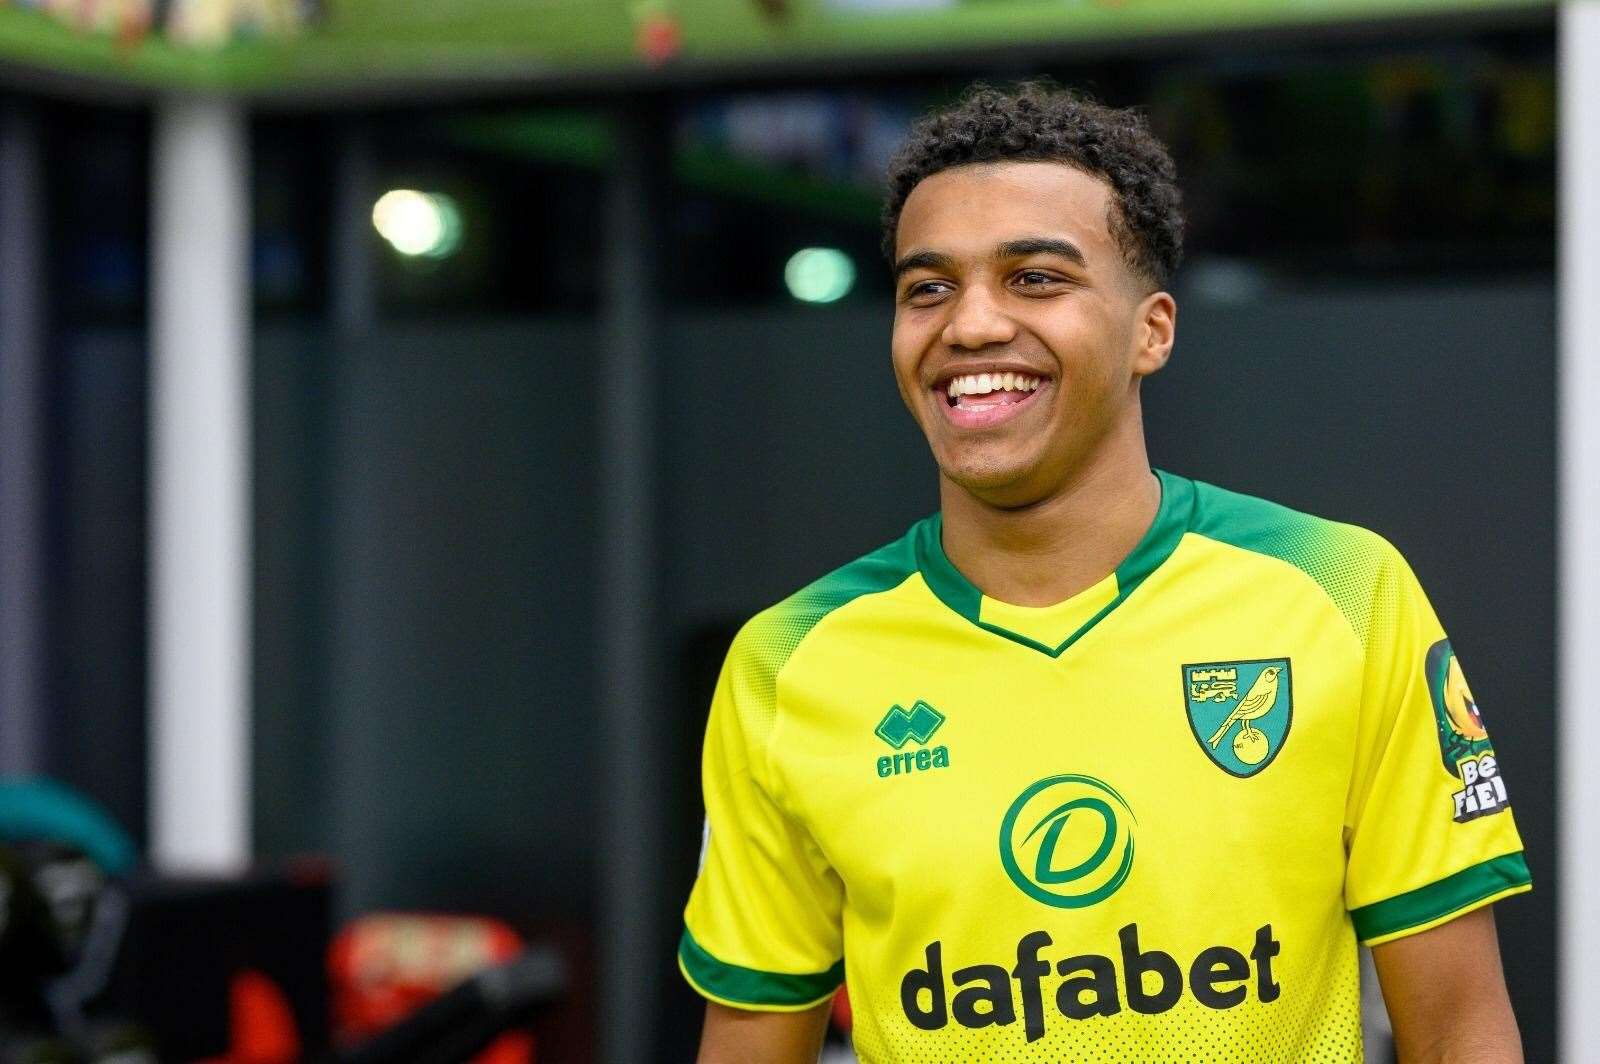 Sam McCallum on the day he signed for Norwich